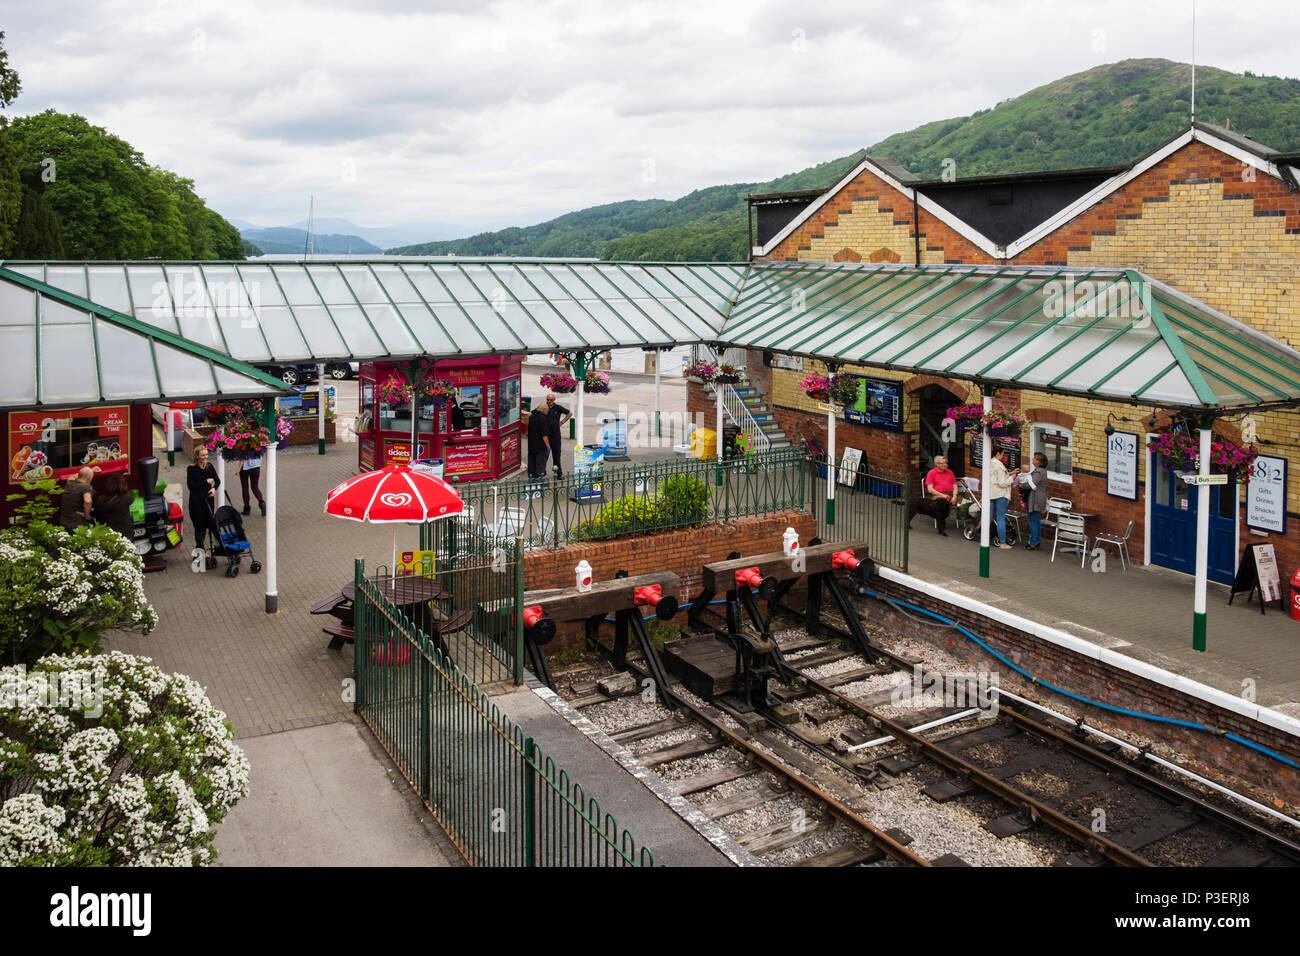 High view of station for Lakeside and Haverthwaite steam railway beside Windermere in the Lake District. Lakeside Cumbria England UK Britain Stock Photo